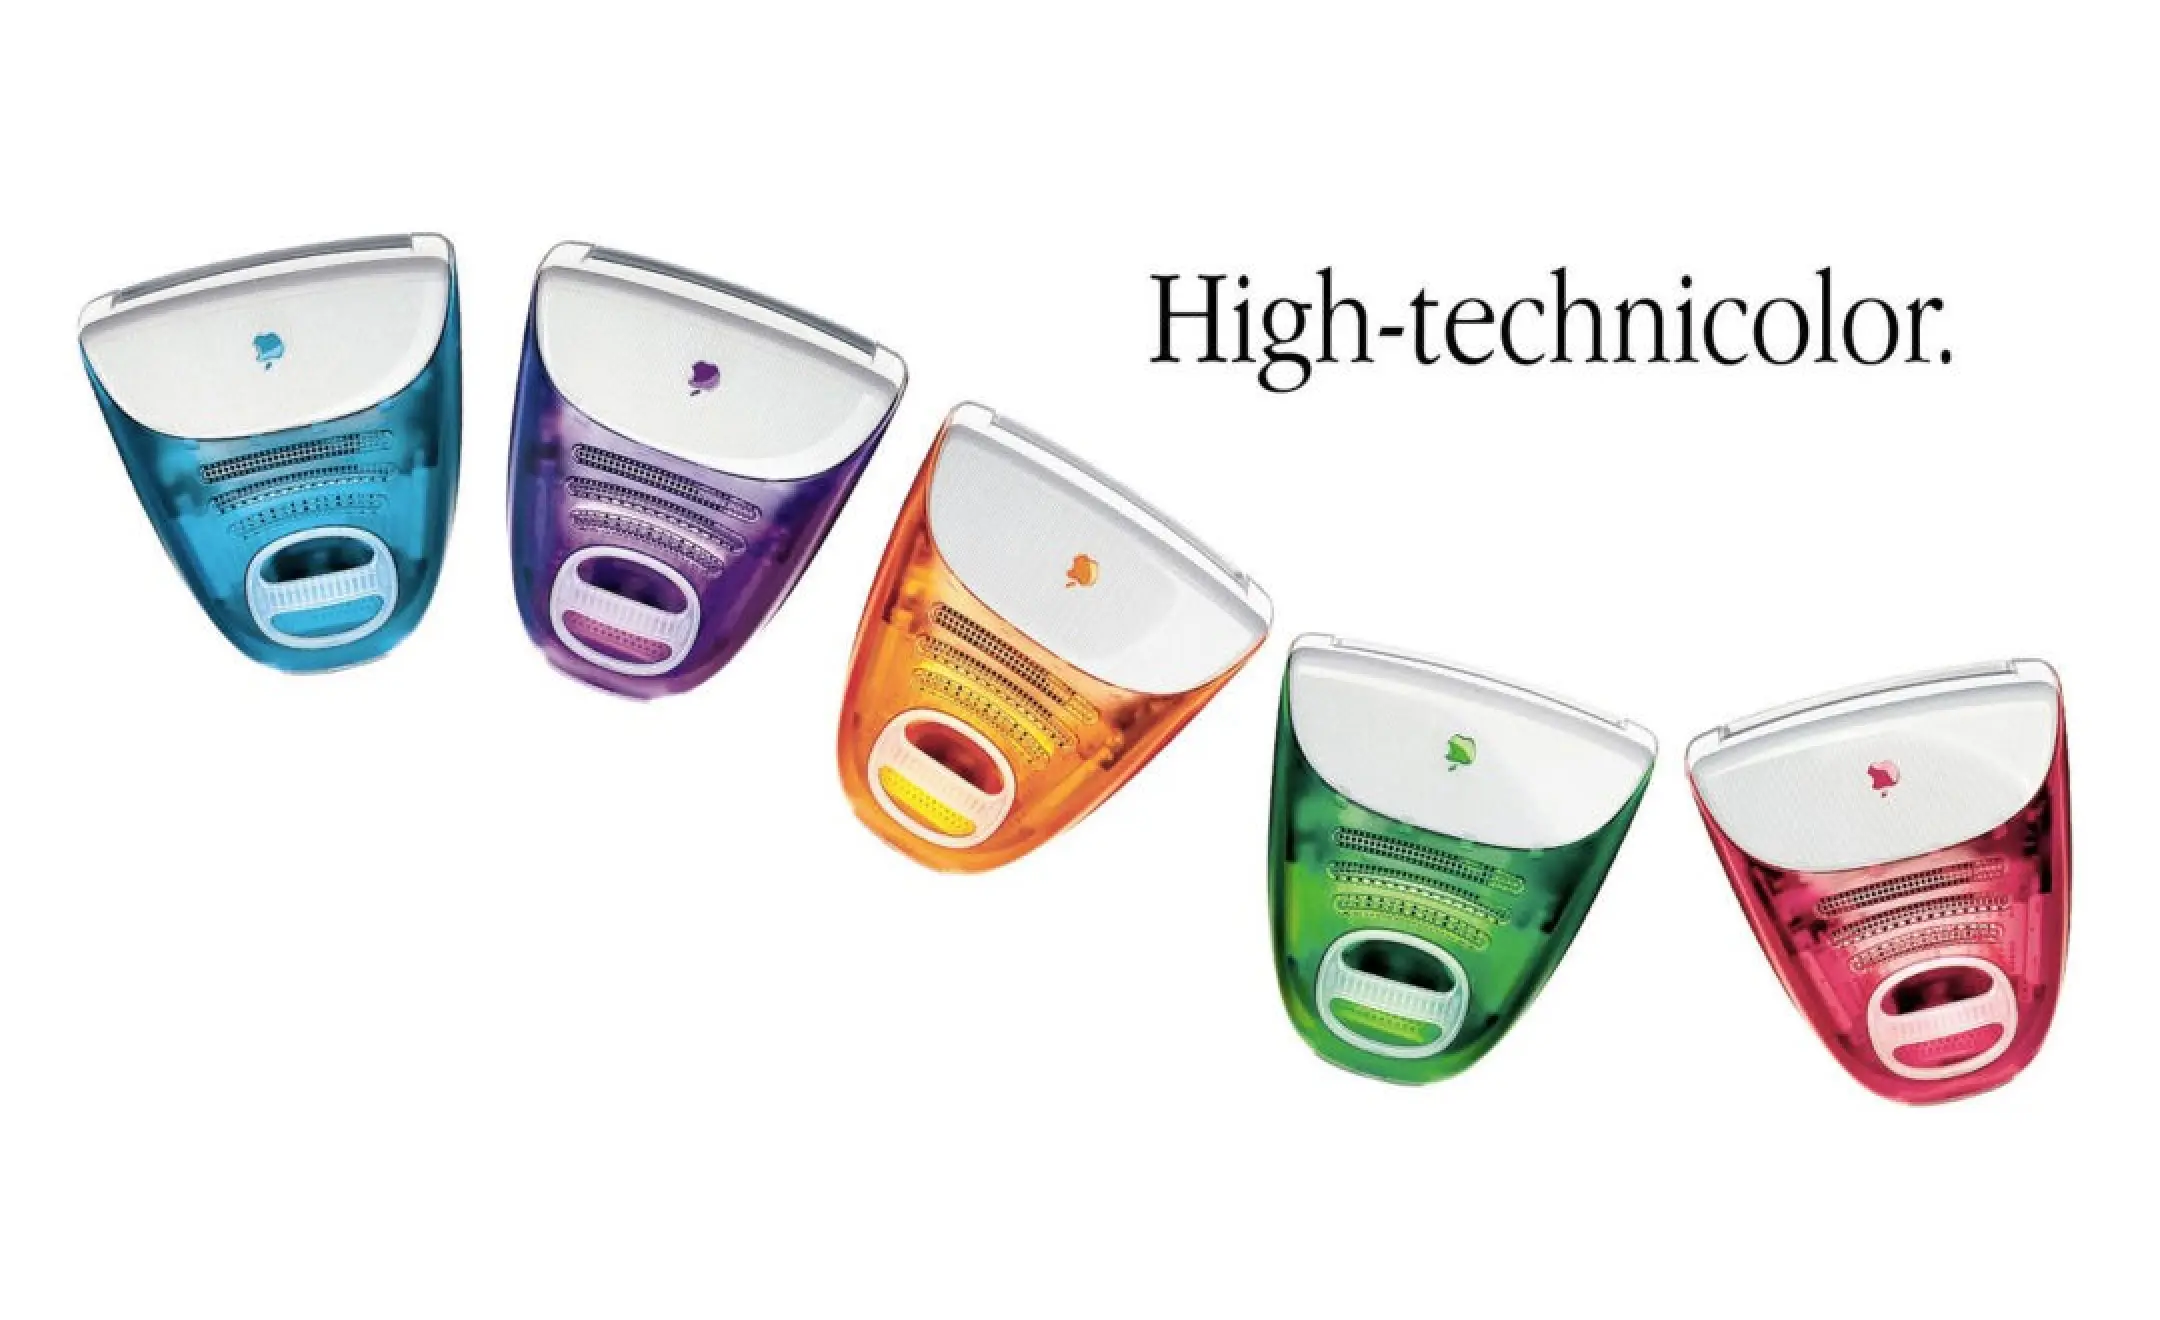 A screenshot of the colorful old iMacs